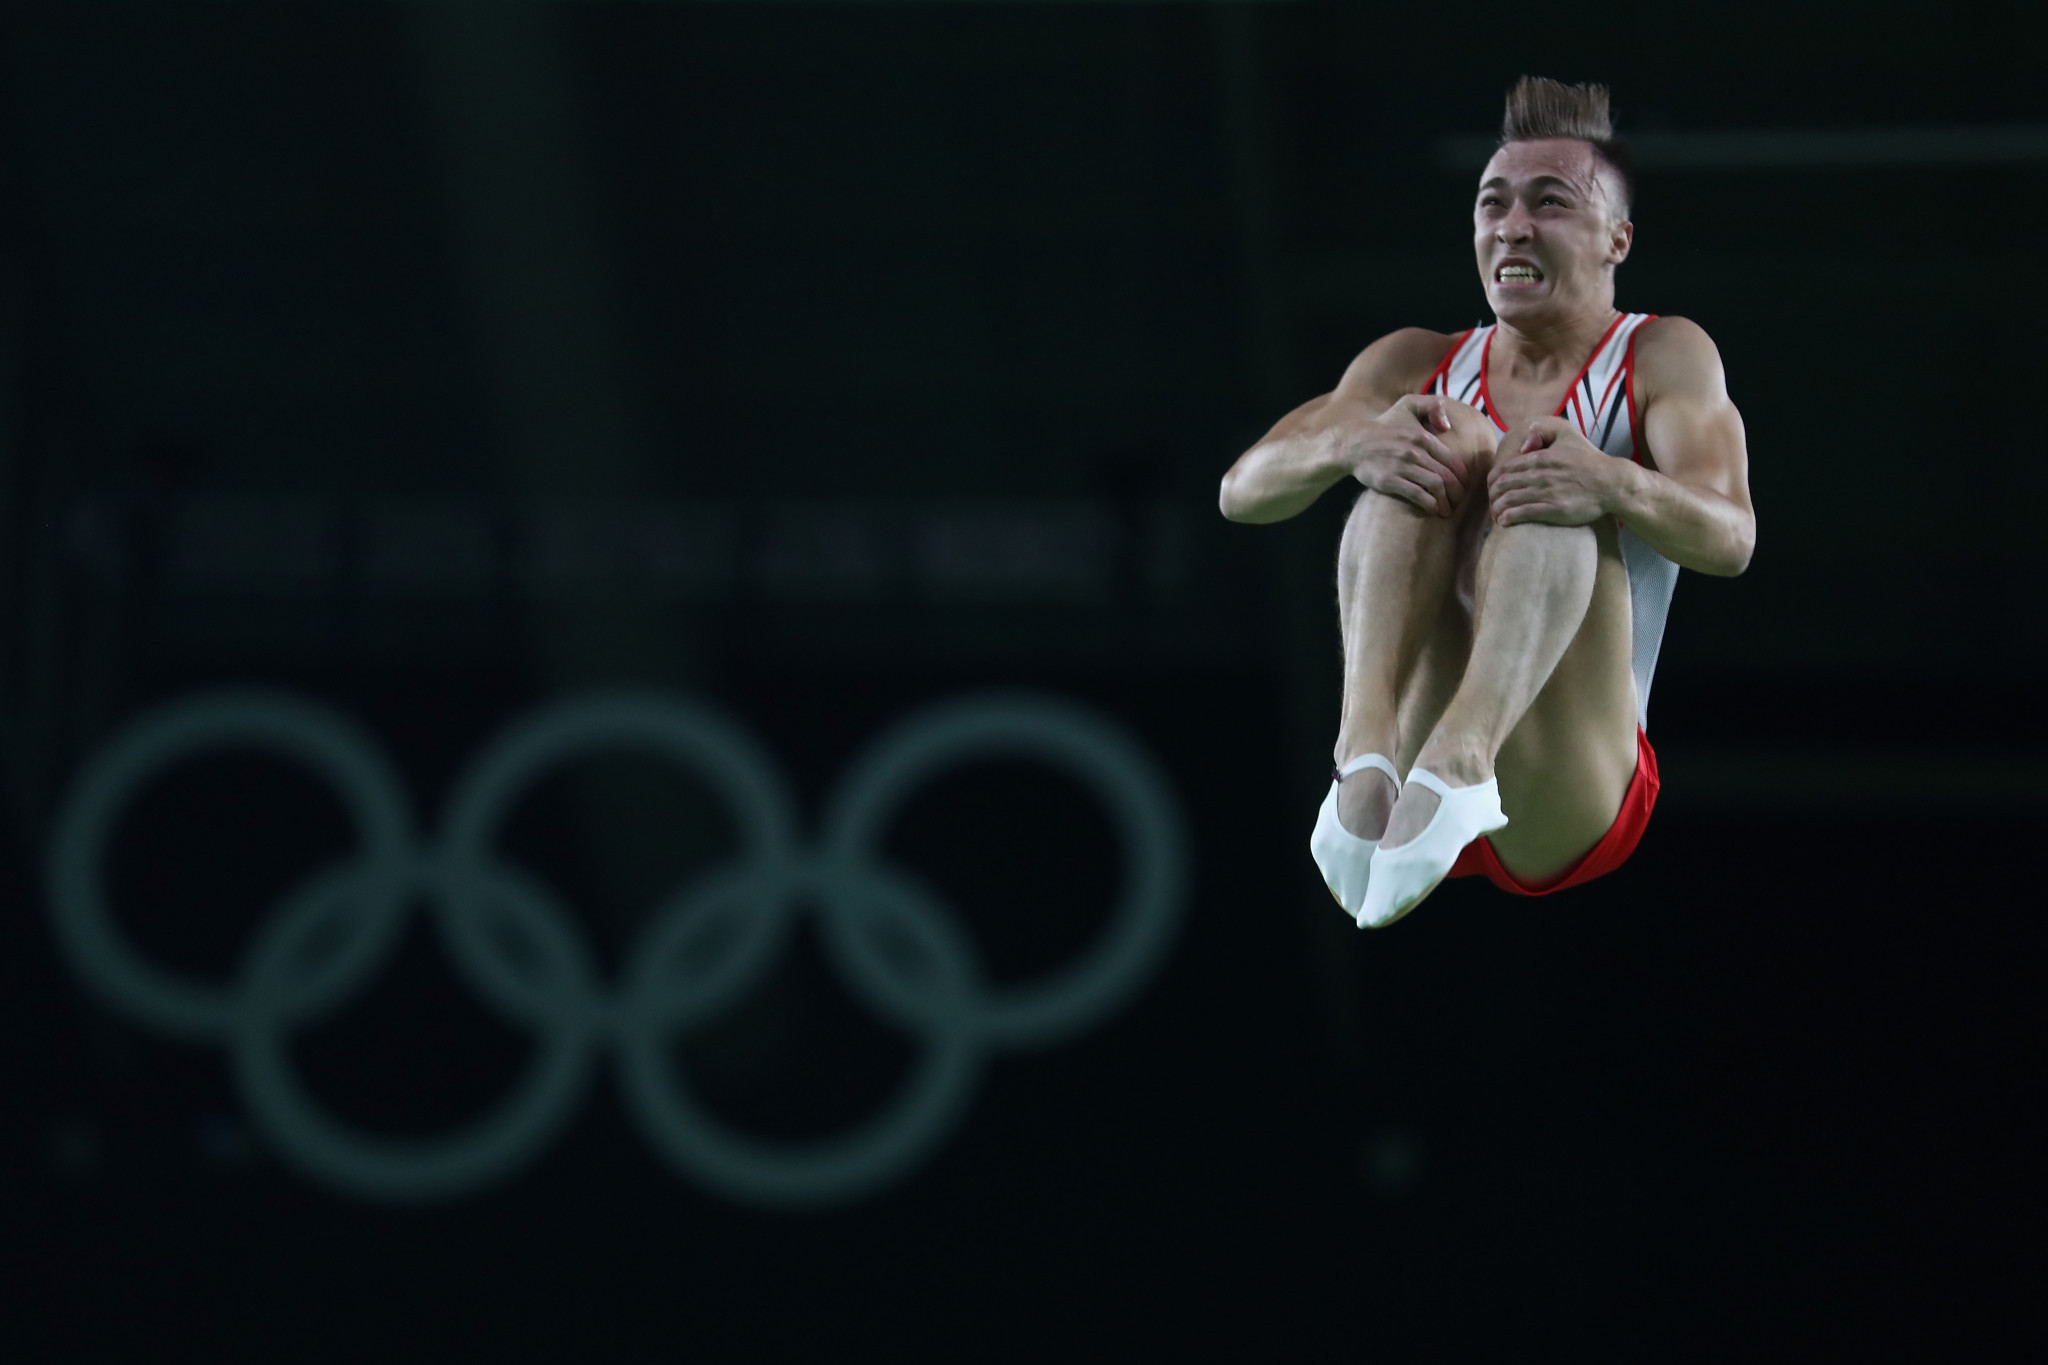 Belarus' Uladzislau Hancharou will be aiming to add the world title to the Olympic gold medal he claimed at last year's Games in Rio de Janeiro ©Getty Images